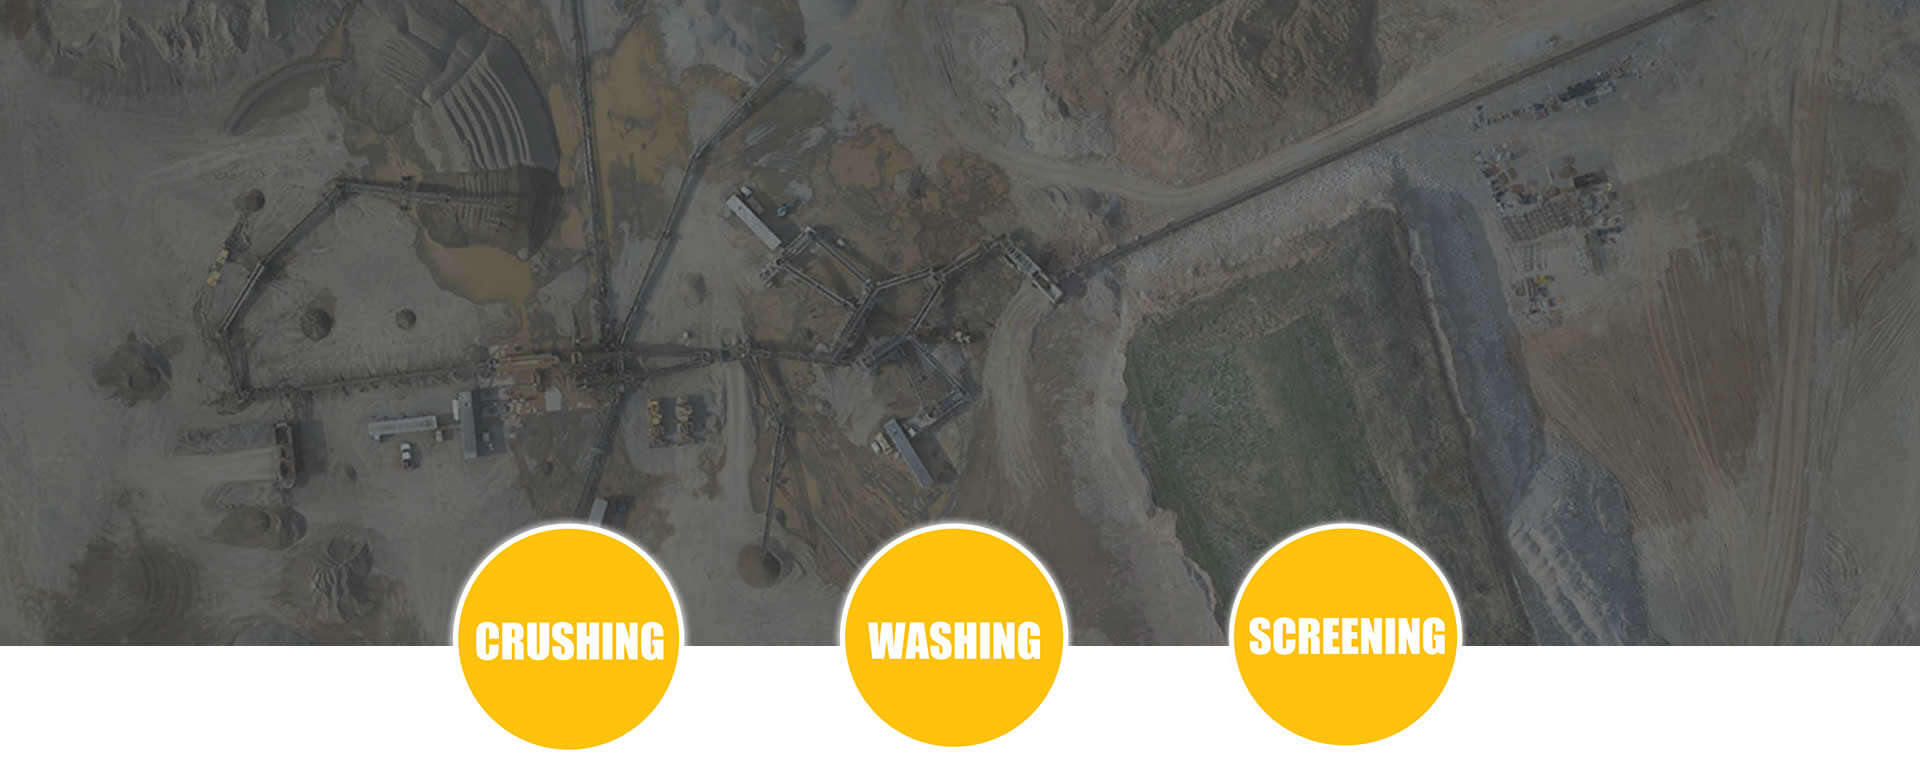 background image of bird-eye view of gravel pit